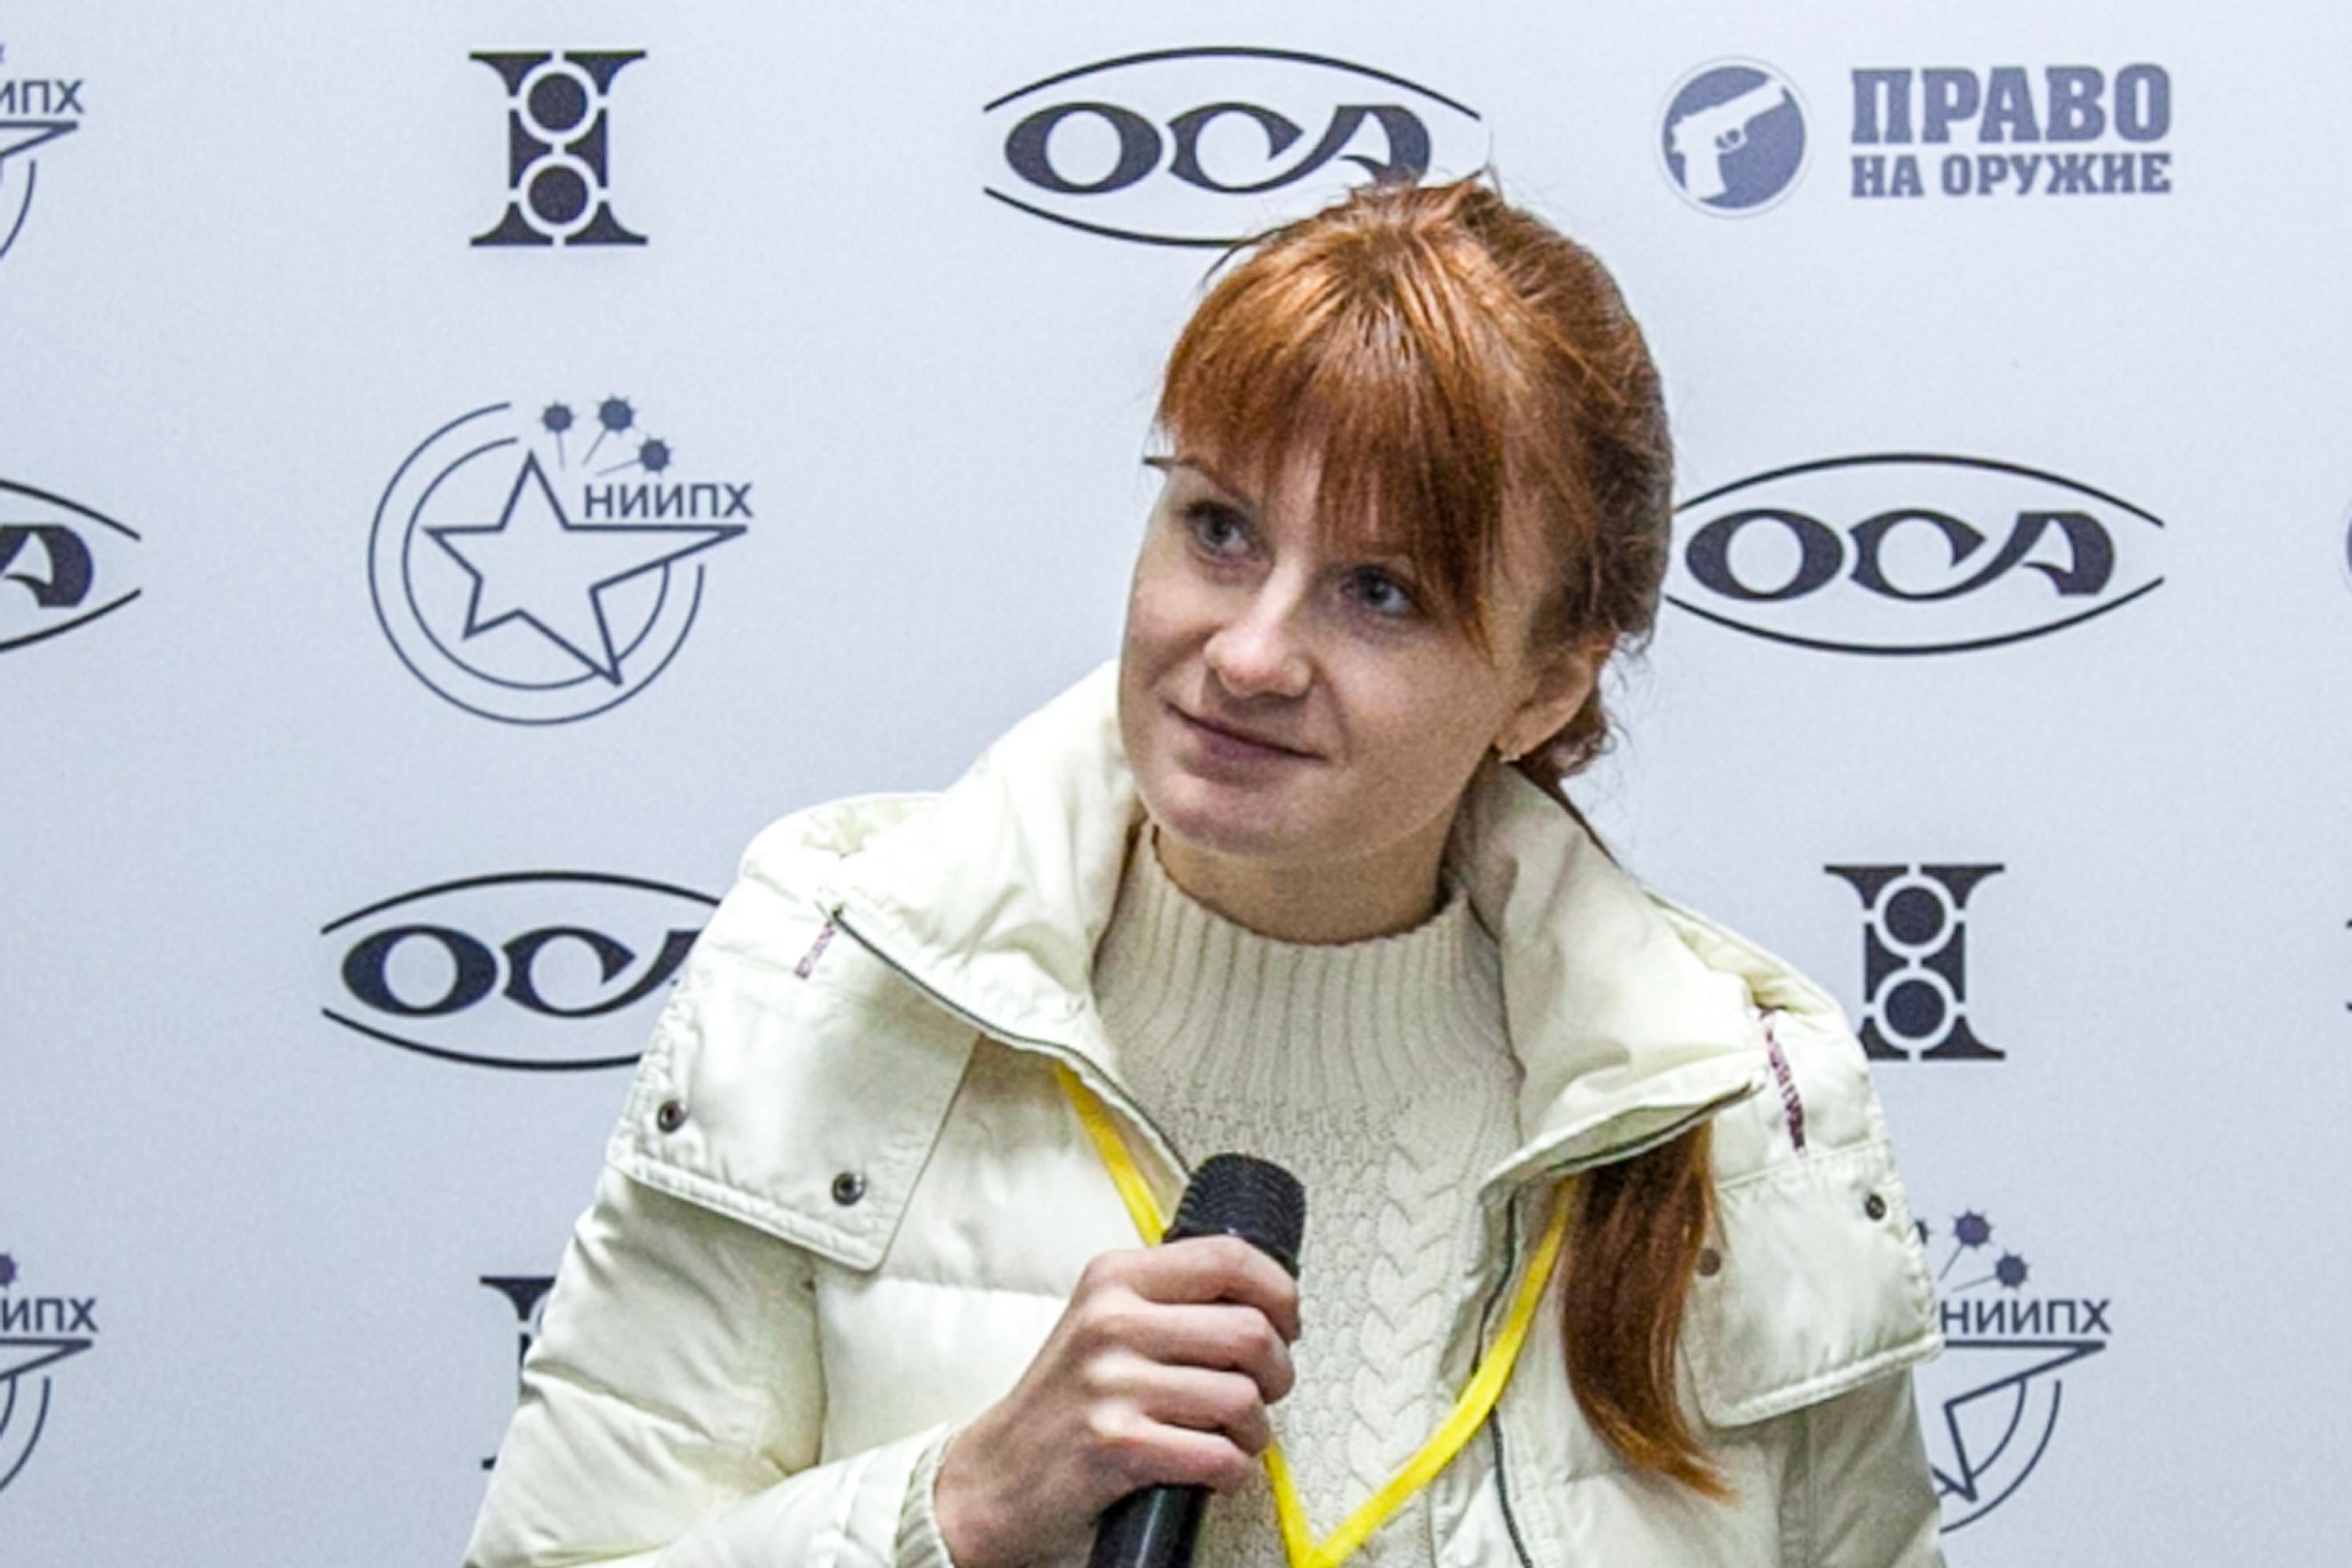 Mariia Butina during a press conference in Moscow in 2013.